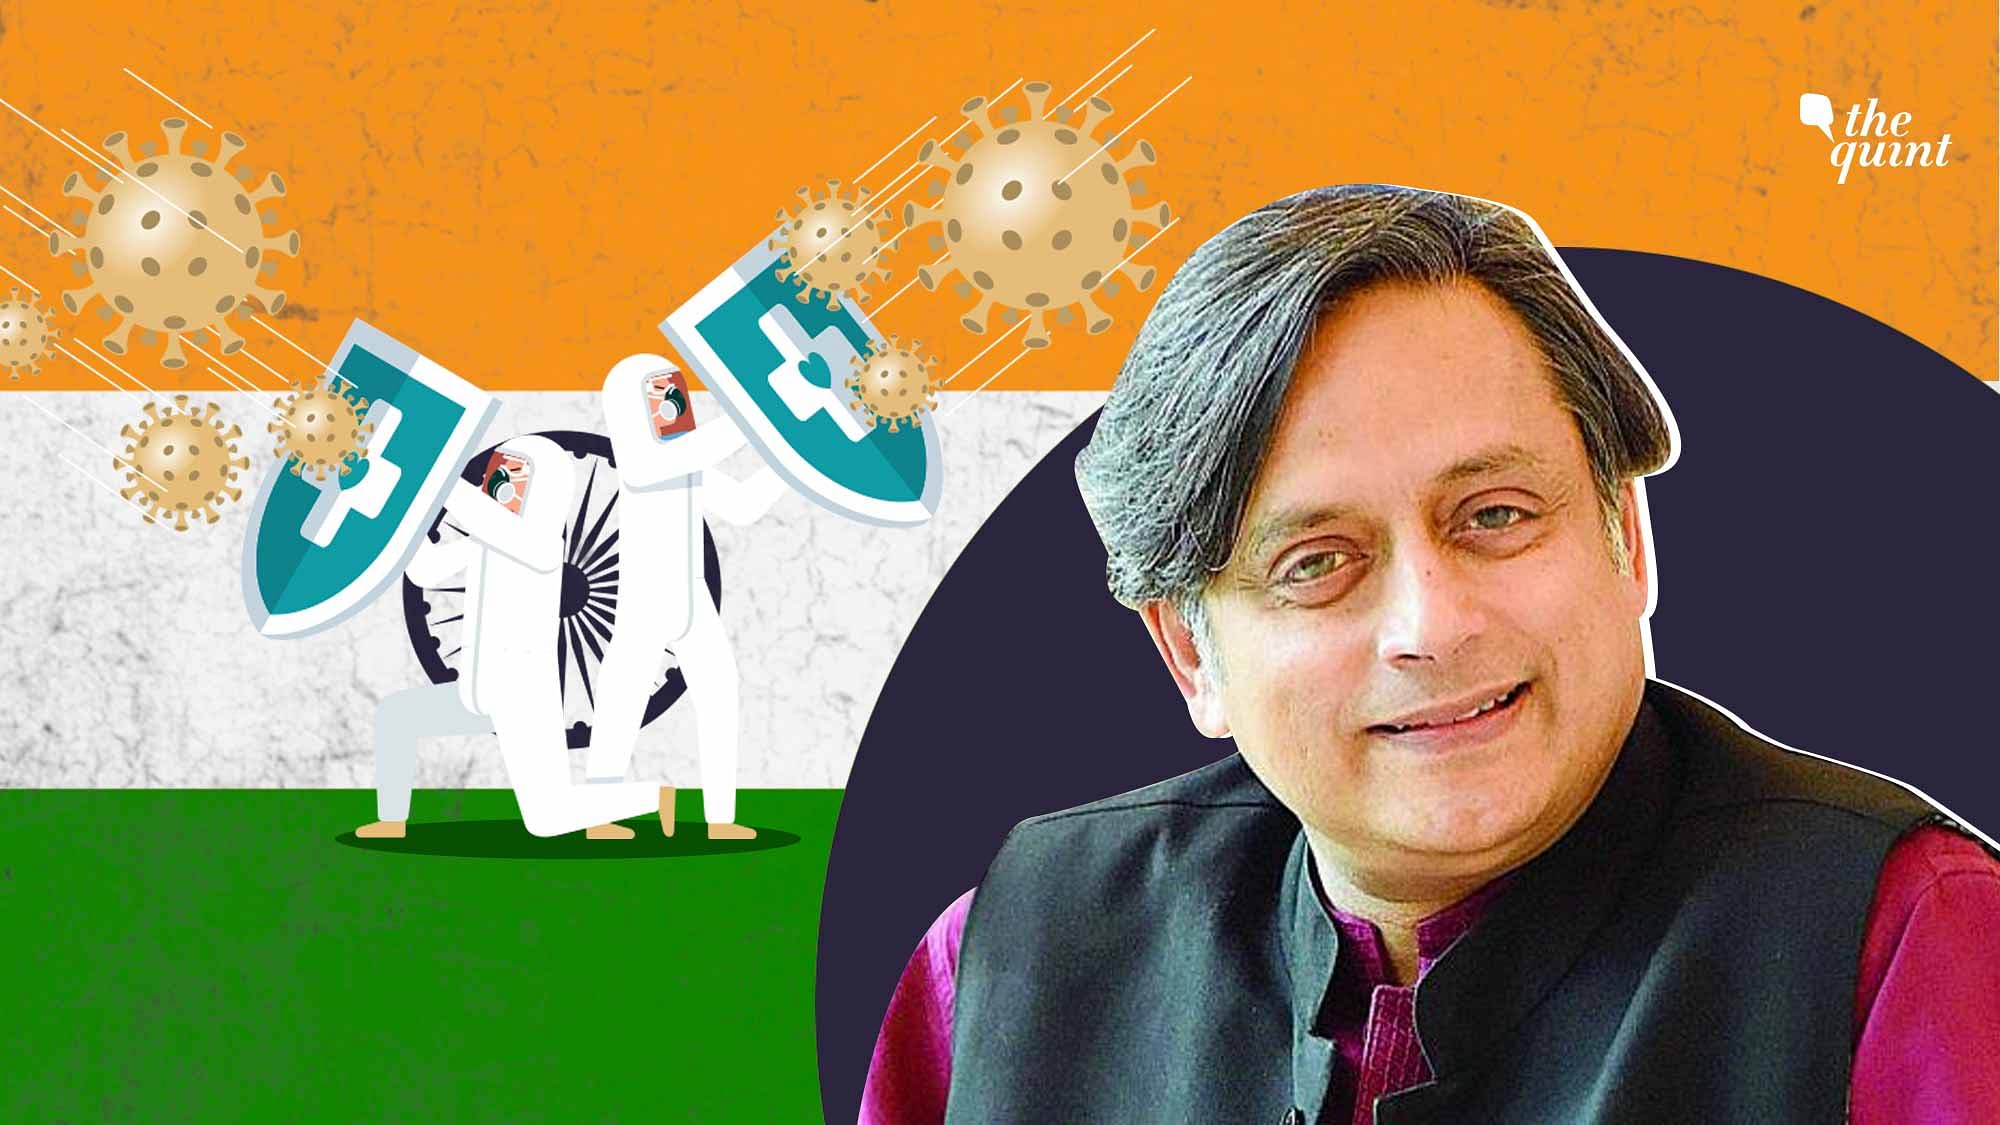 Image of Congress leader Dr Shashi Tharoor, map of India, and an illustration to show ‘fight against COVID’ used for representational purposes.